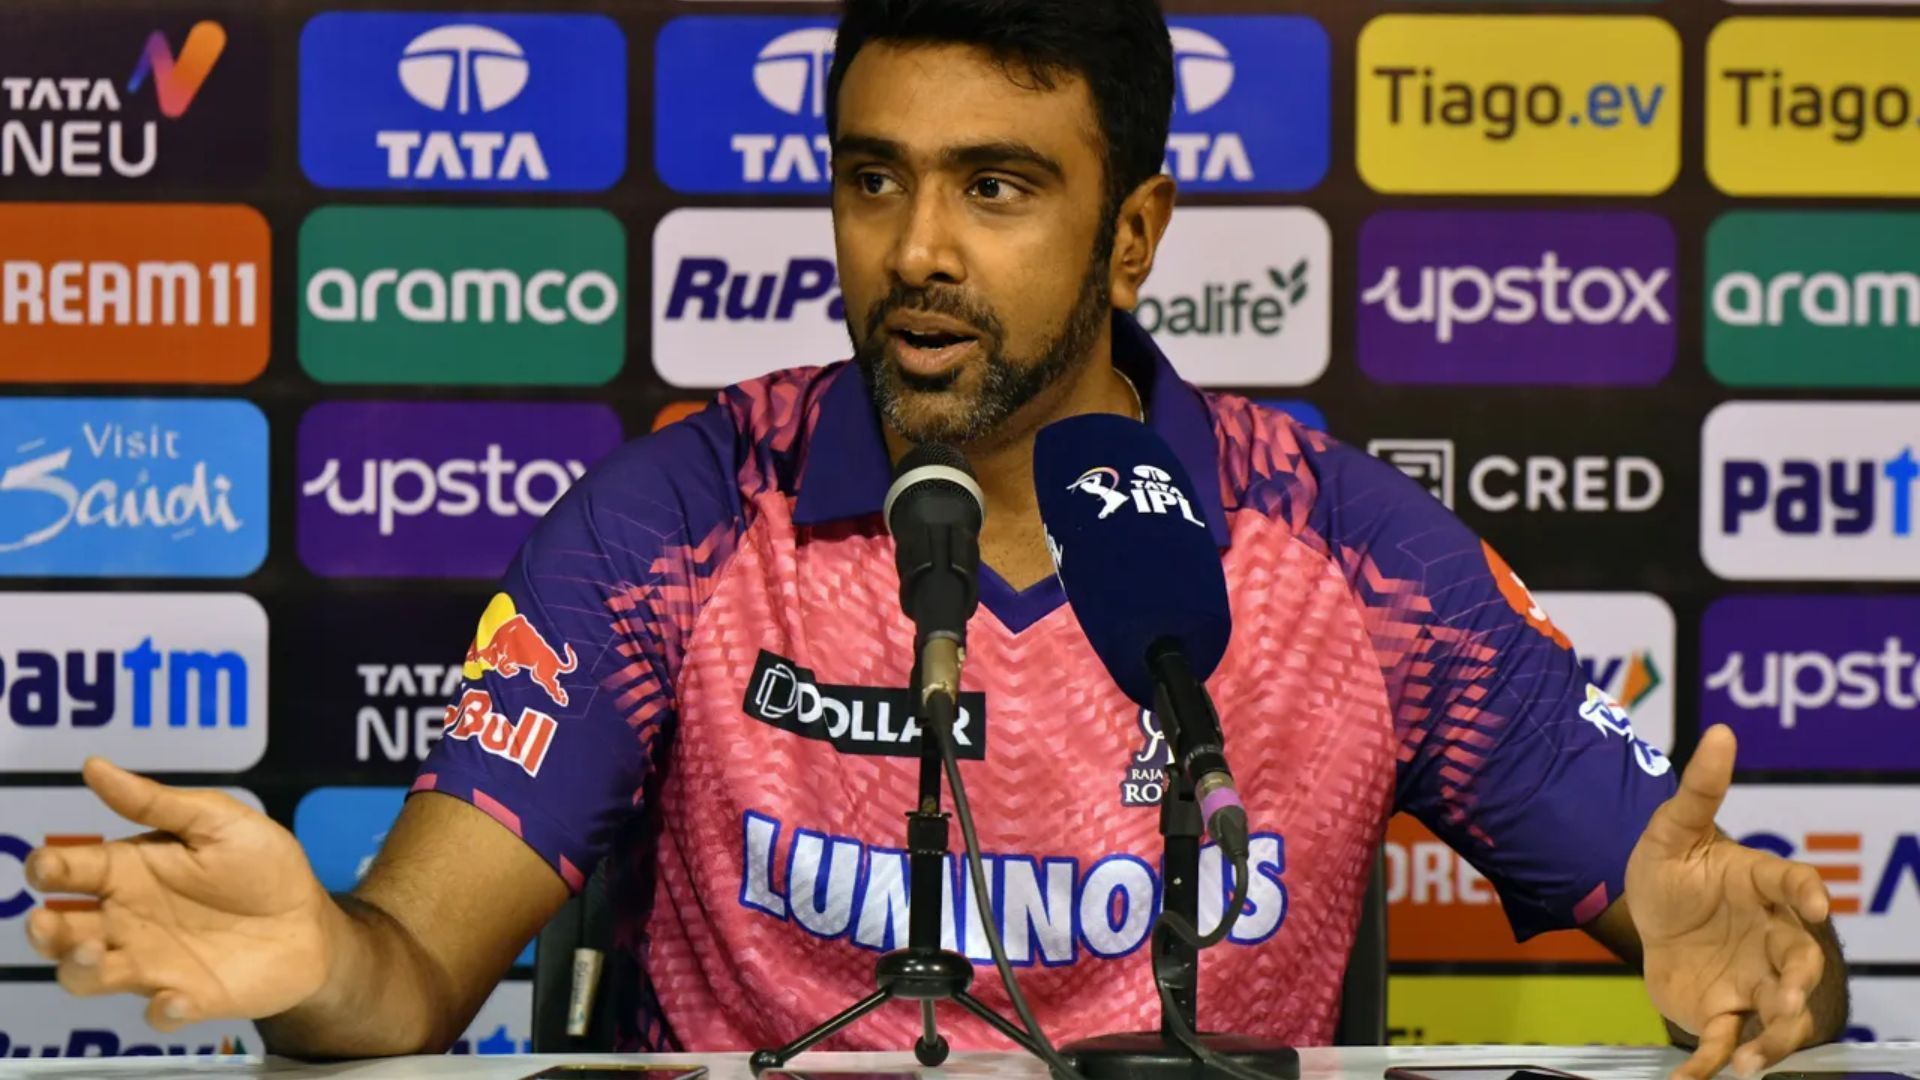 Ravichandran Ashwin excels at bowling in dewy conditions. (Image Courtesy: iplt20.com)